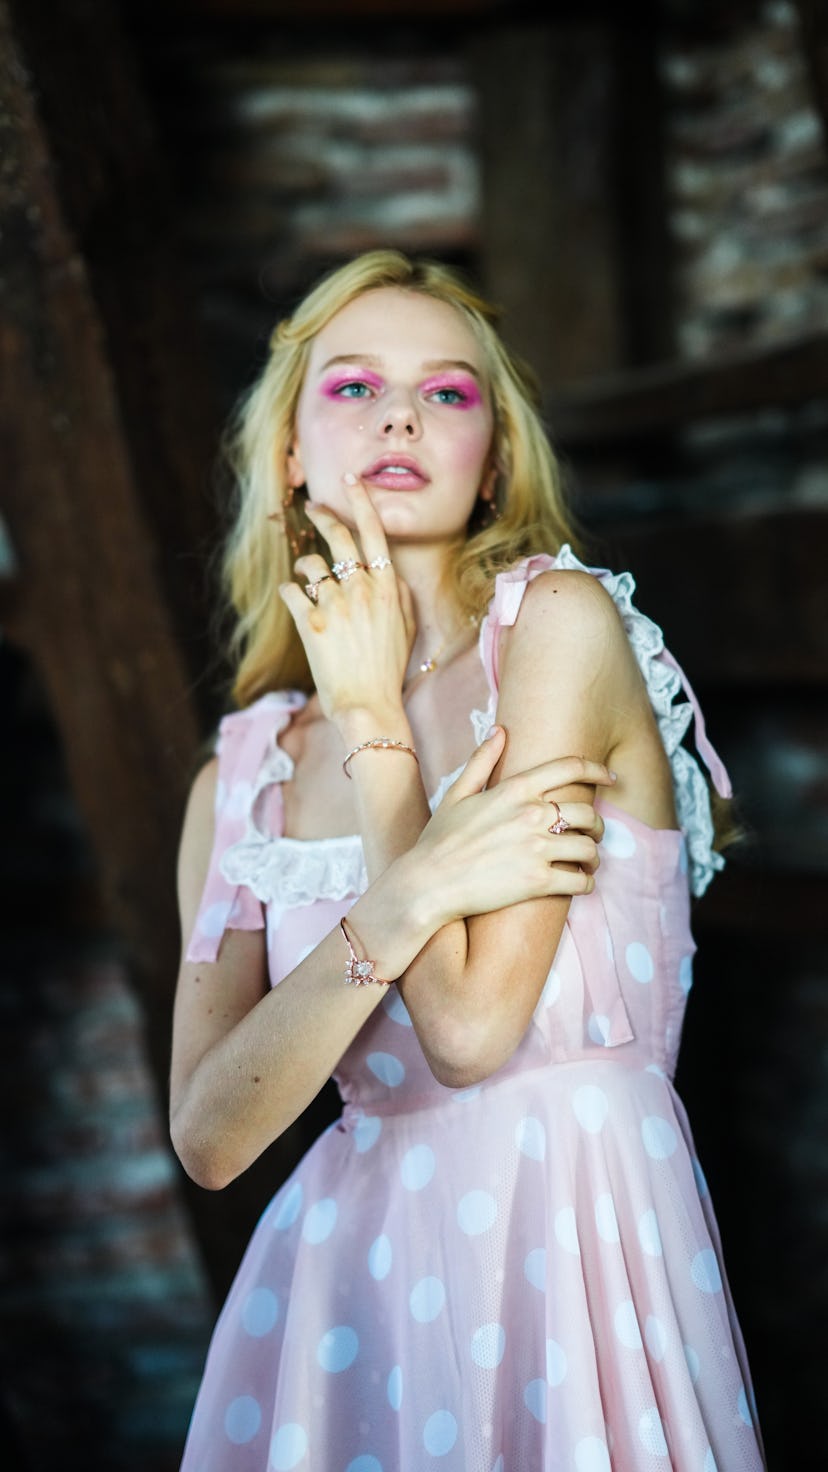 A model wearing a hot pink eyeshadow with a shimmering, halo center.